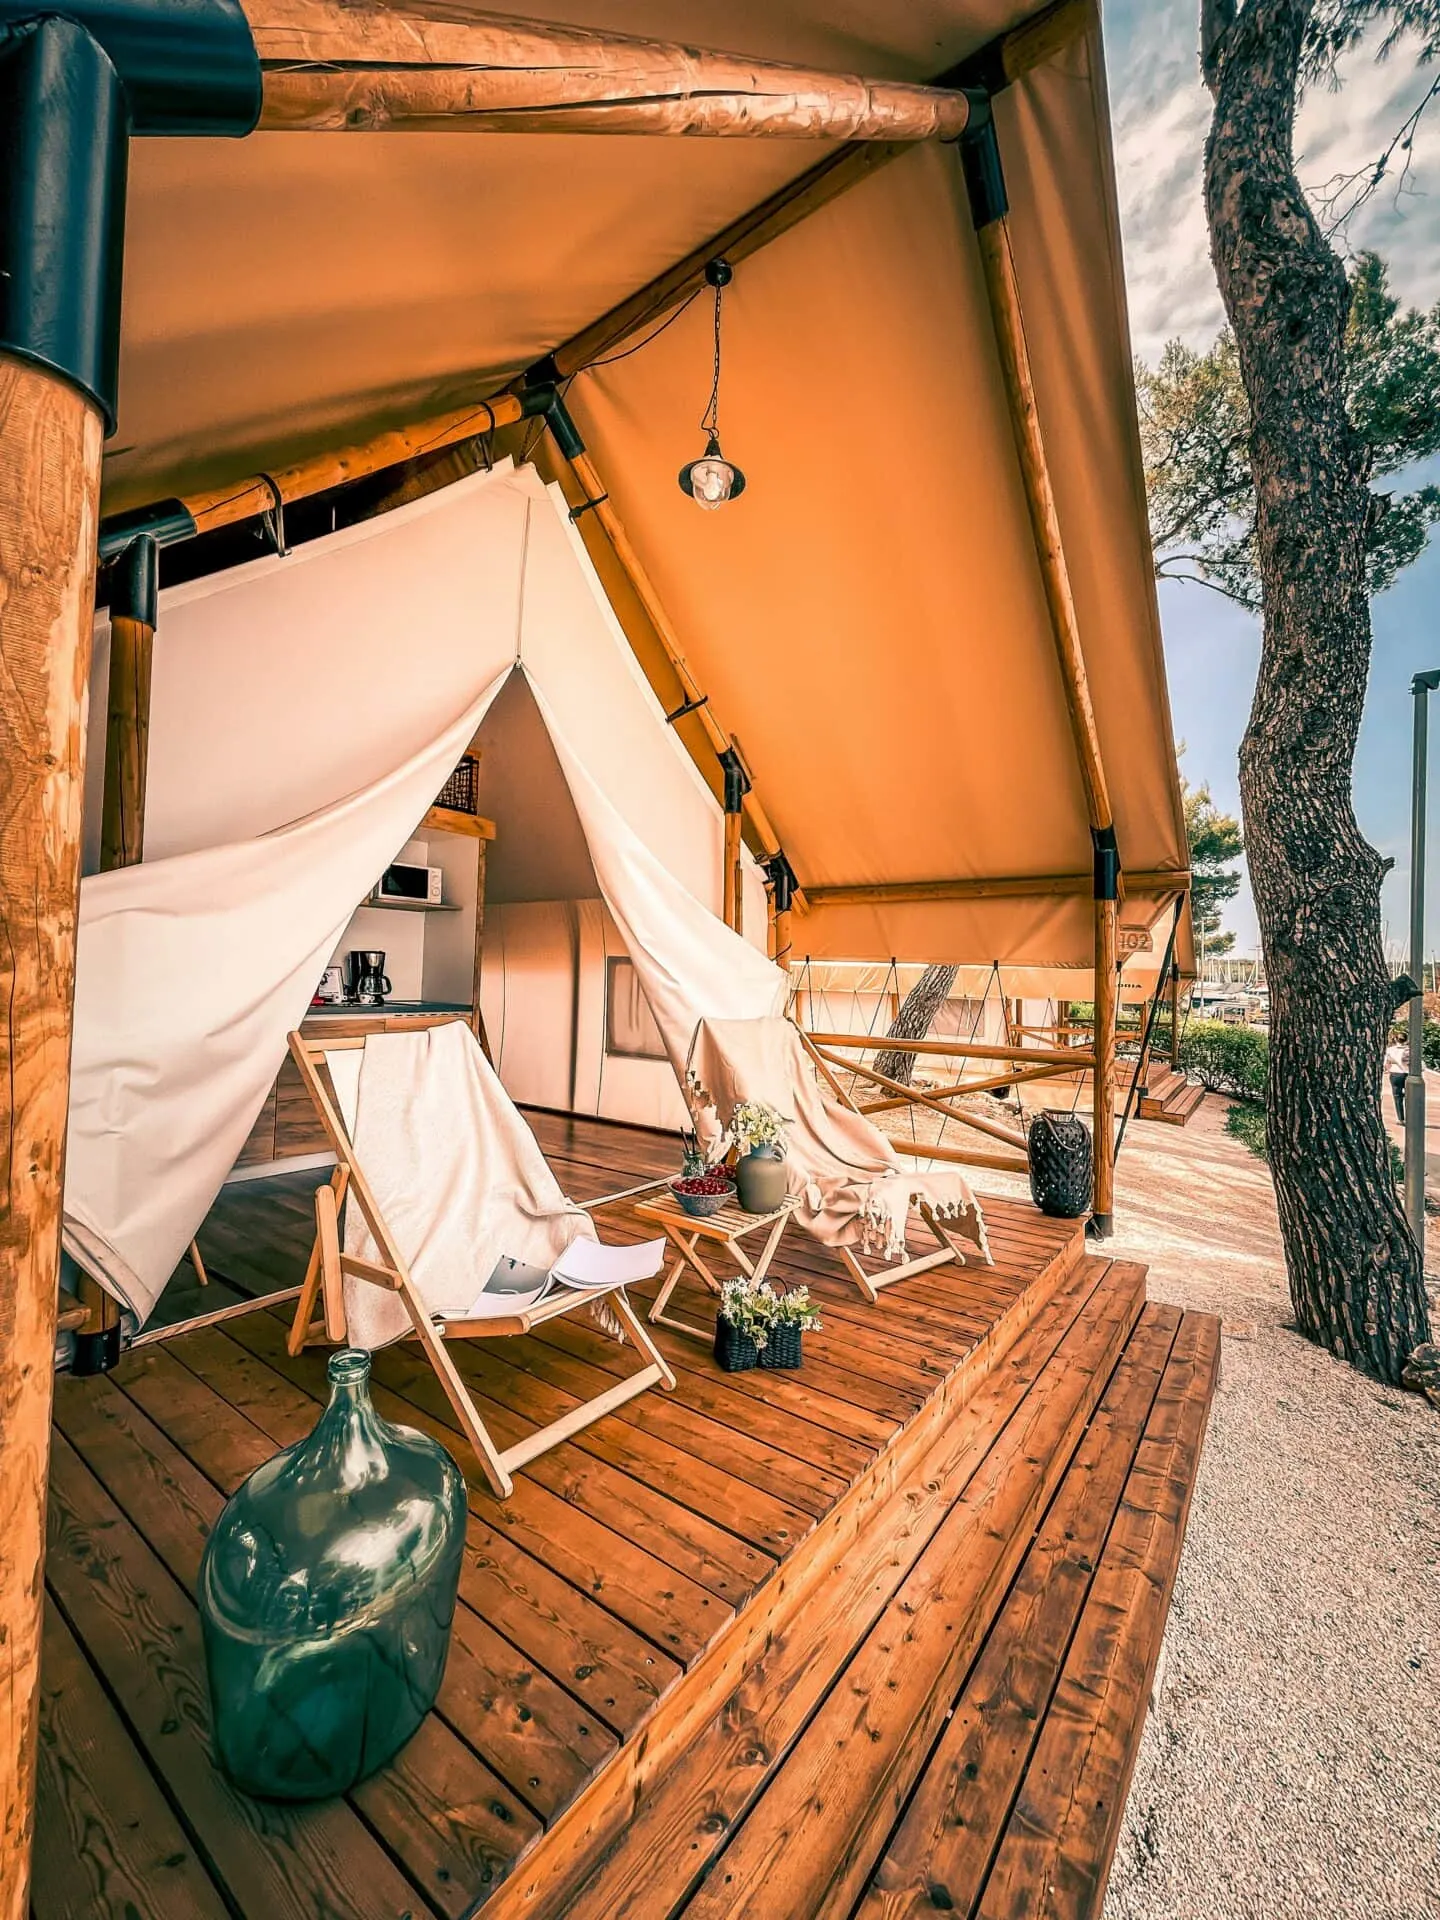 What is glamping? Glamping combines comfortable structures with furniture and other amenities